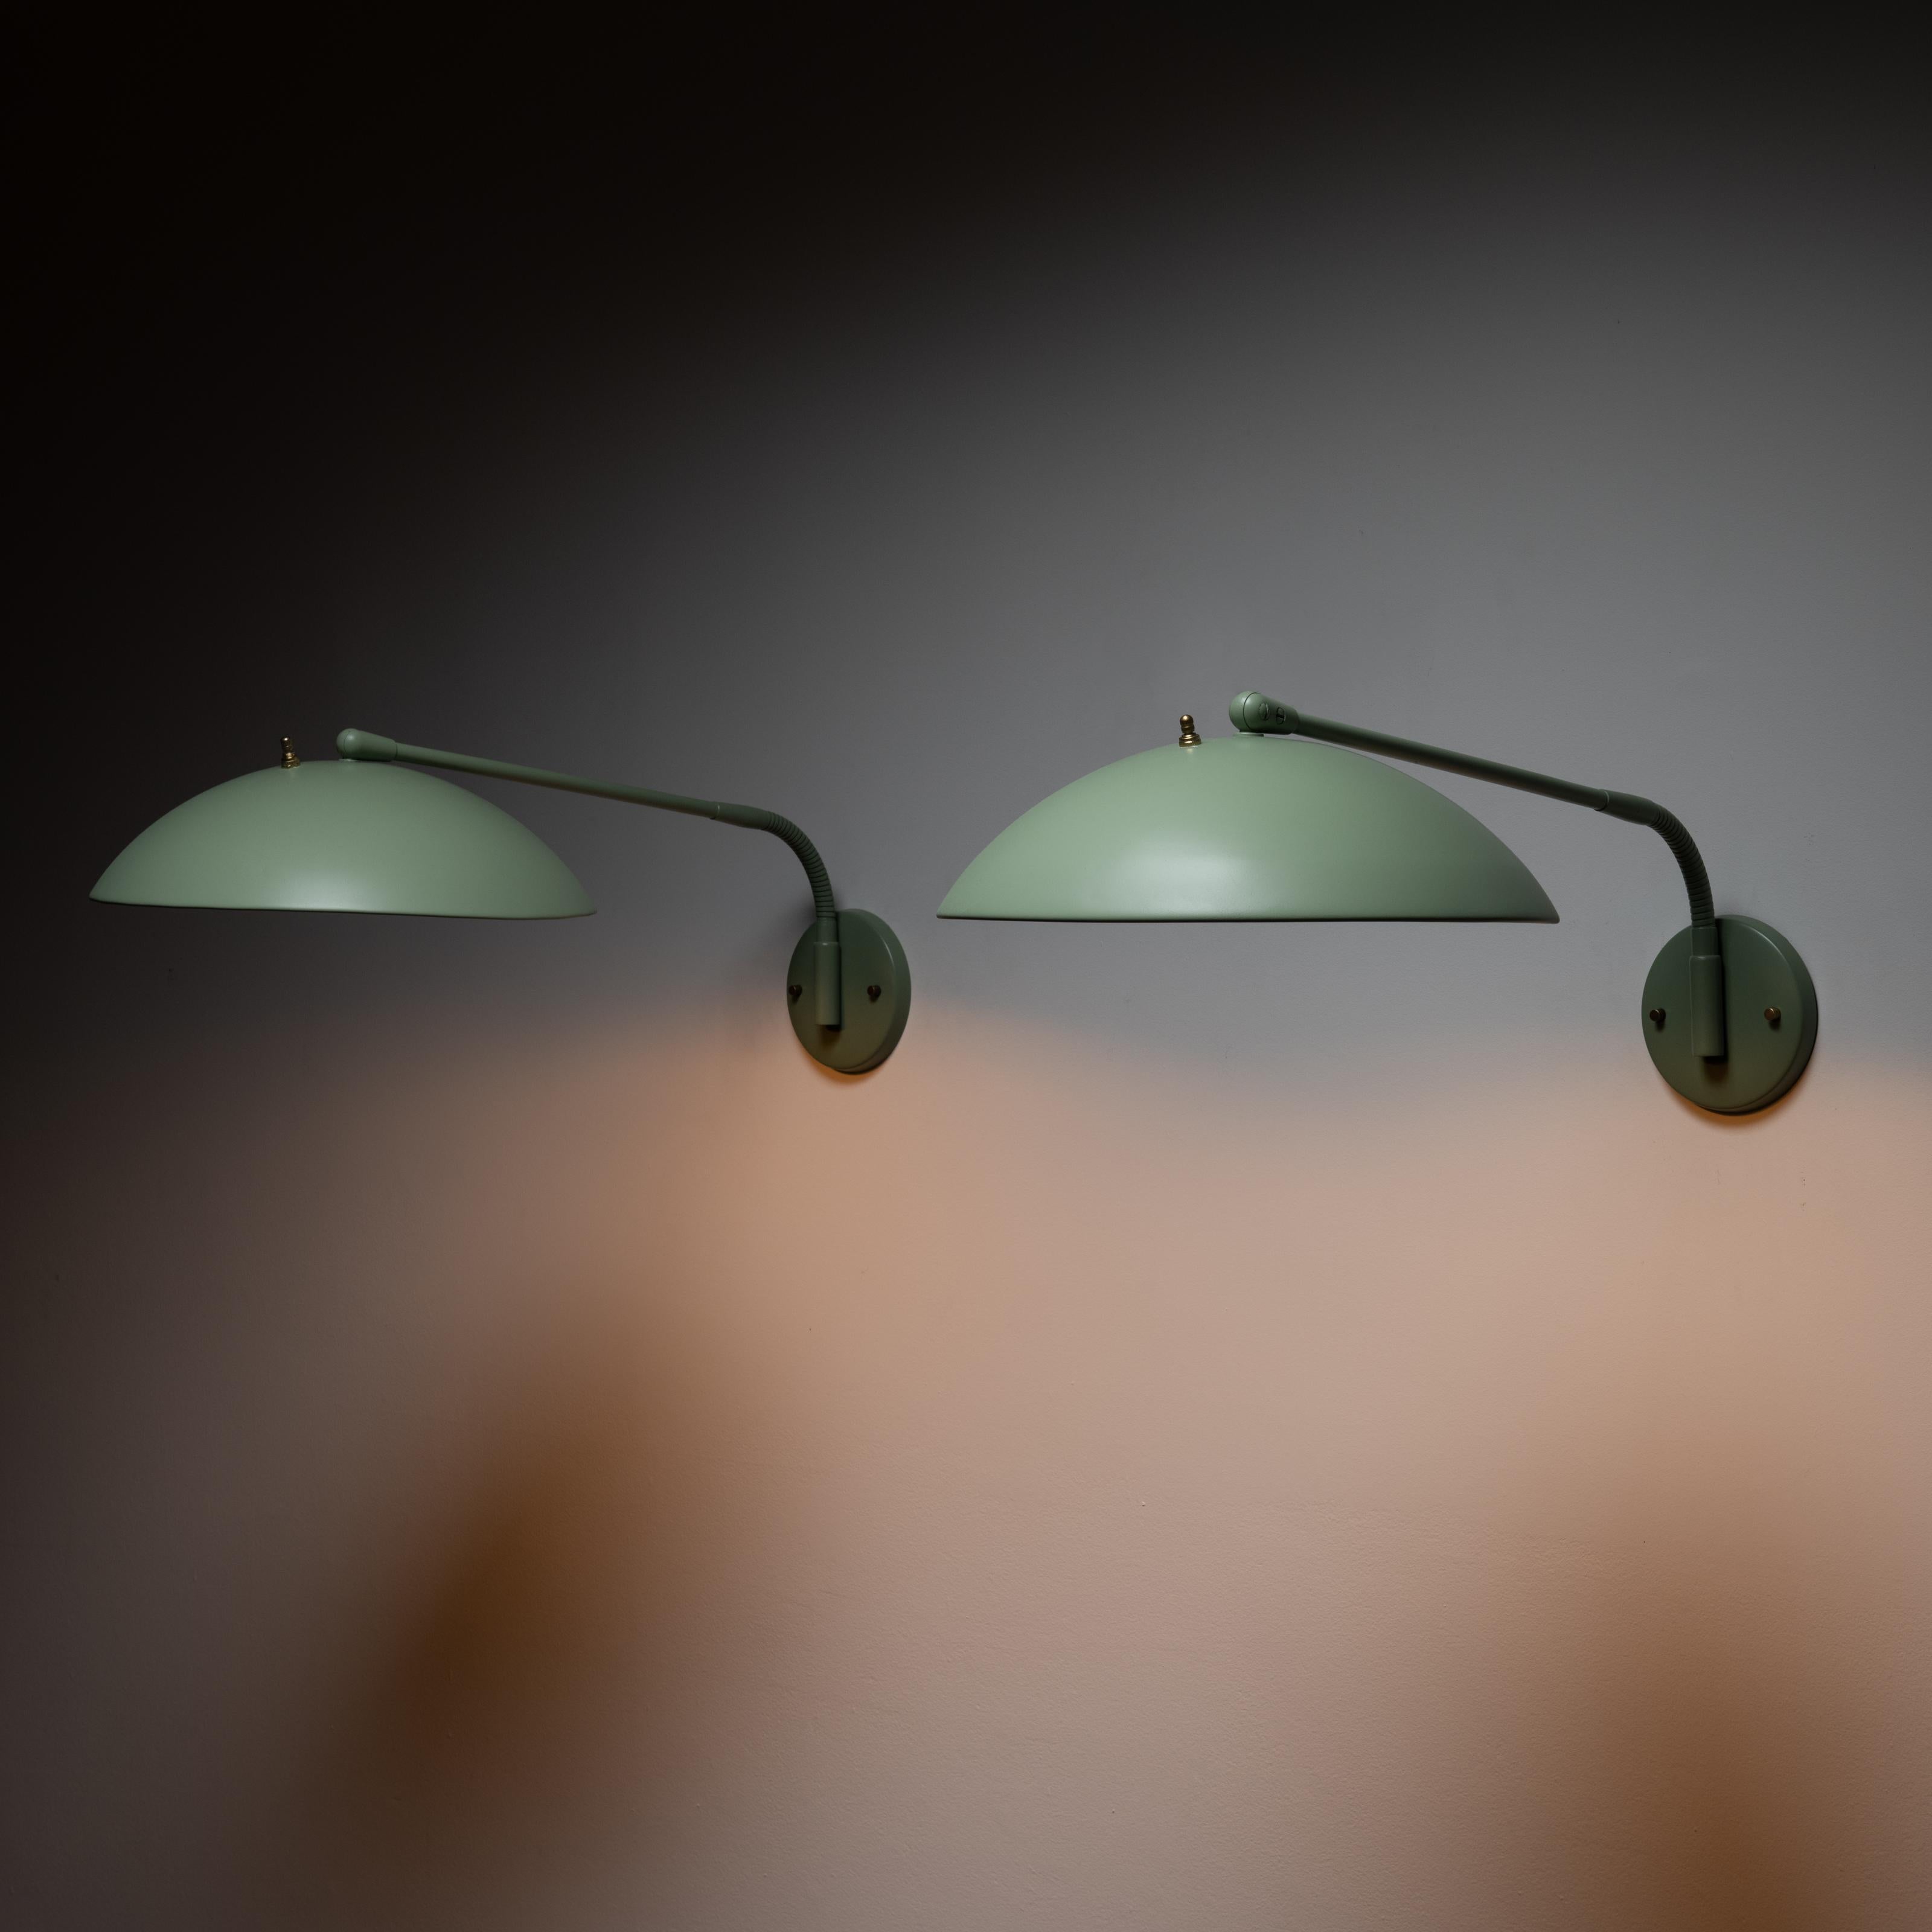 Pair of wall lights by Kurt Versen. Designed and manufactured in the USA, circa 1948. Flexible stem arms allow for multiple positions on these wall lights. Push button on top of the shades for a secondary switch point once hardwired. Recently